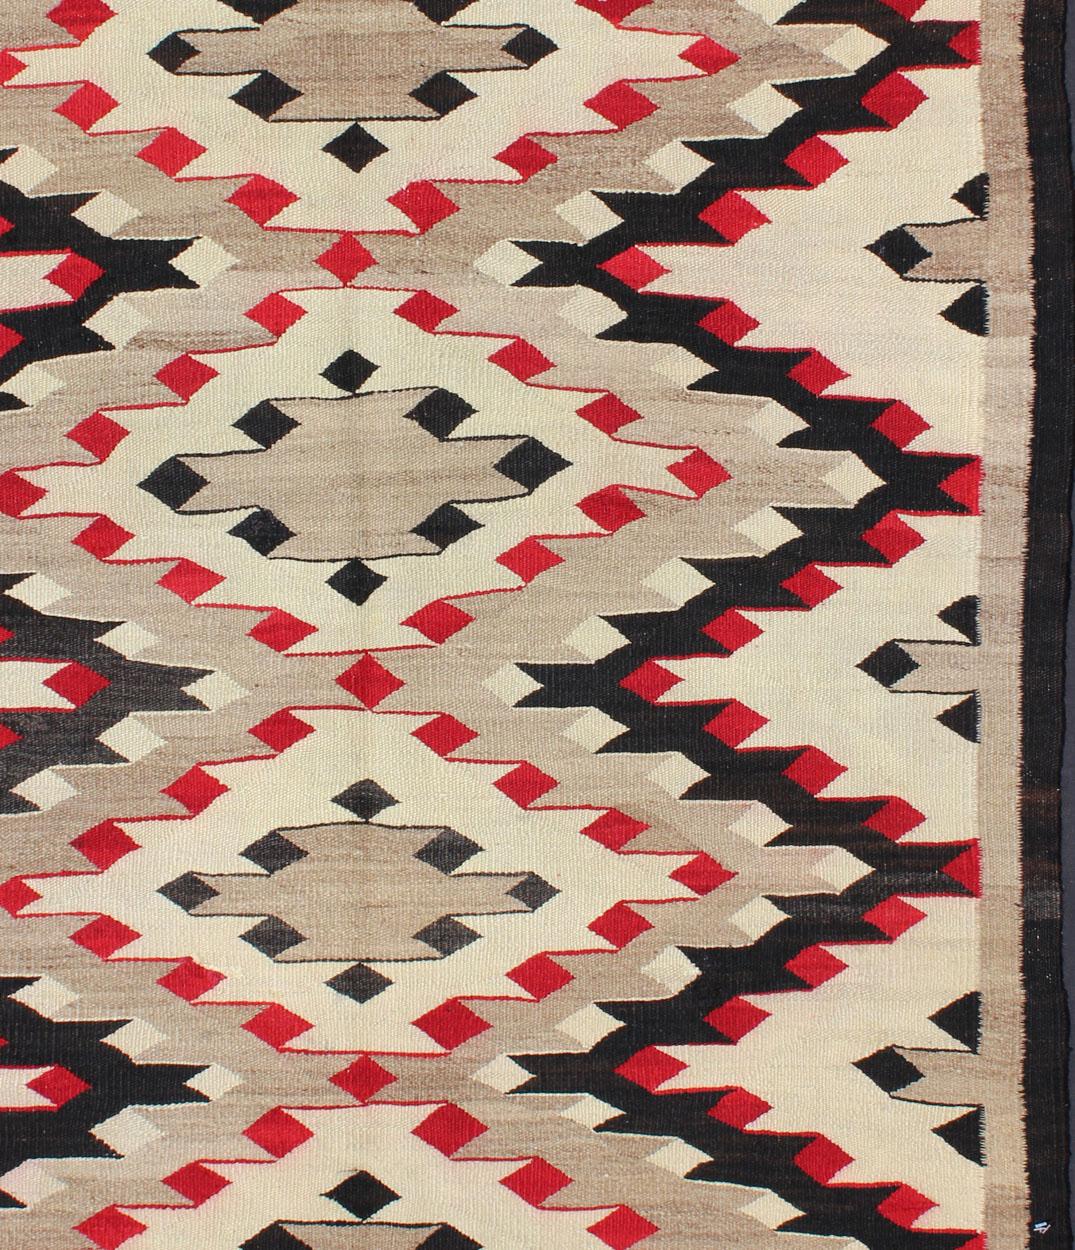 This intriguing vintage Navajo rug was woven by Navajo tribes during the first half of the 20th century. The exciting and unique composition boasts a captivating geometric composition with an all-over diamond medallion design. The range of colors